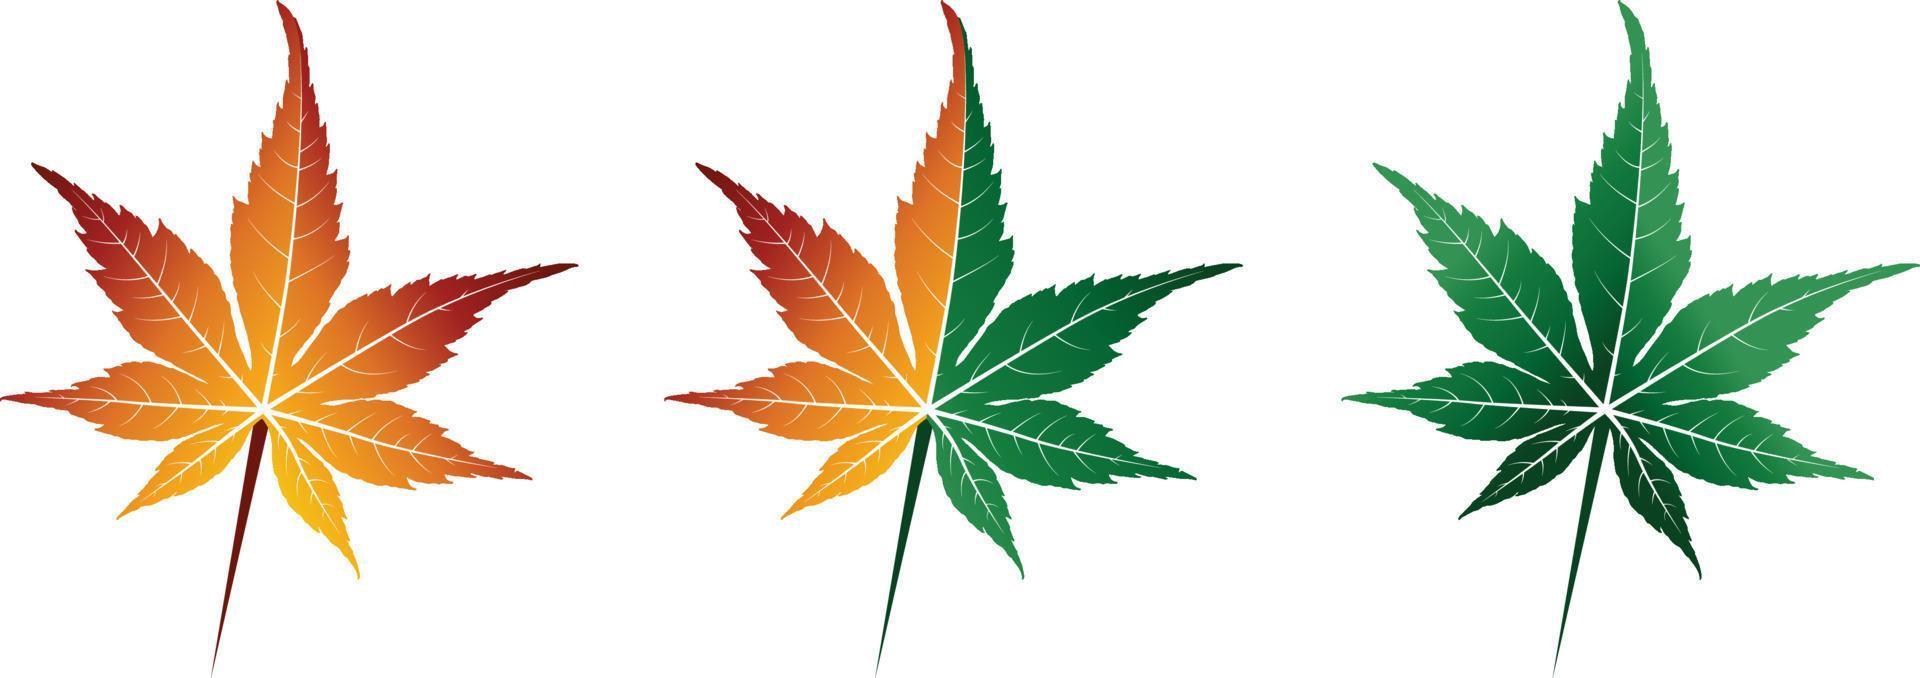 vector of the autumn maple leaf